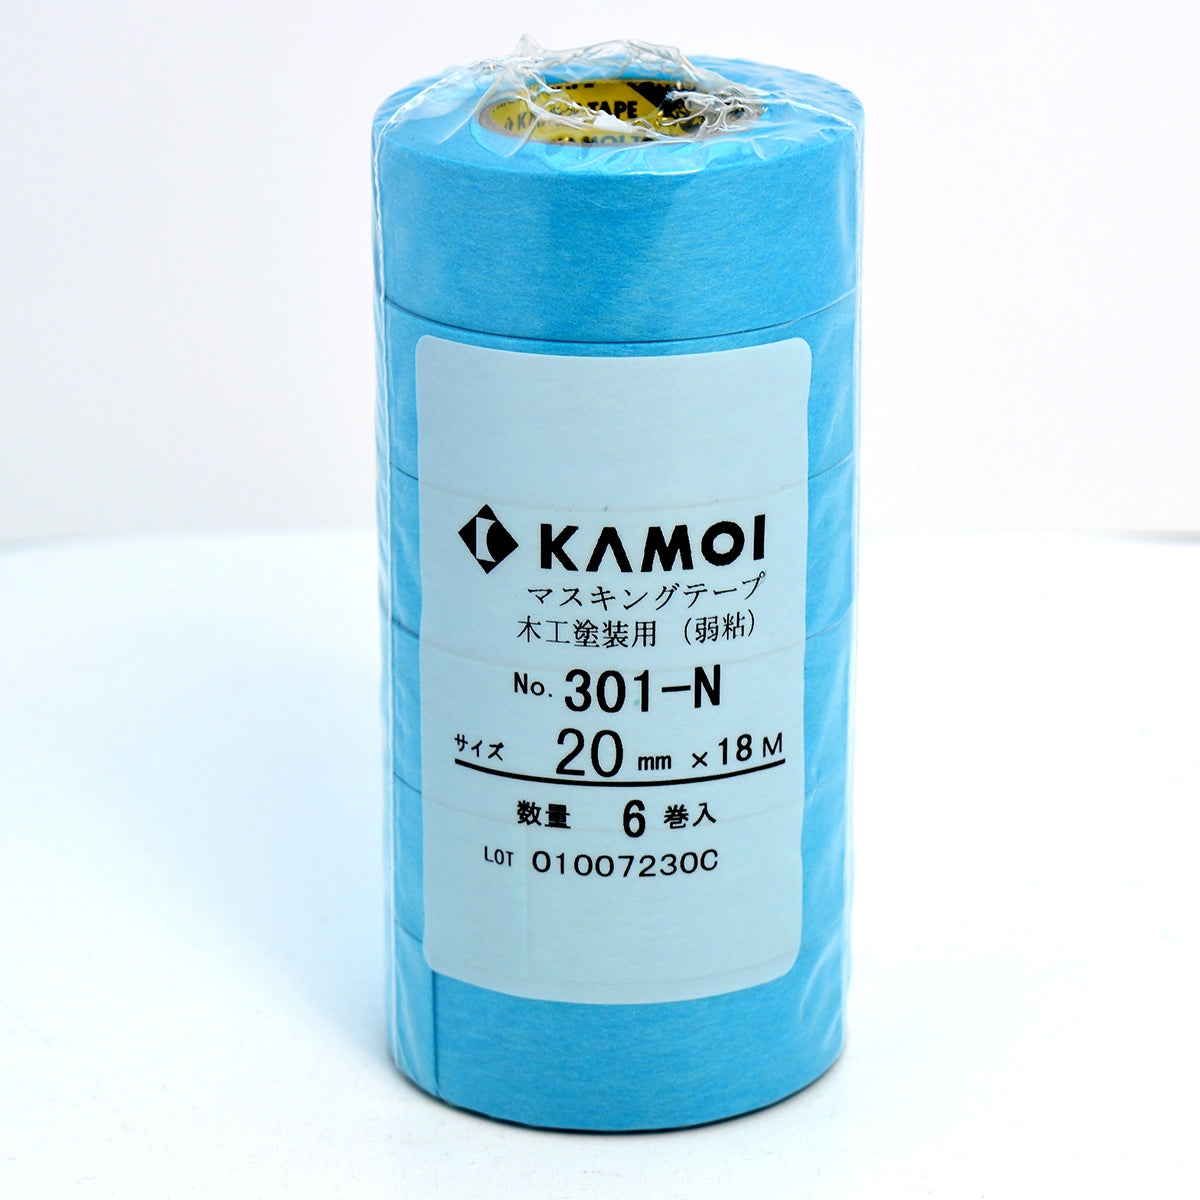 Kamoi 20mm wide Low Tack Masking Tape Pack of 6 rolls